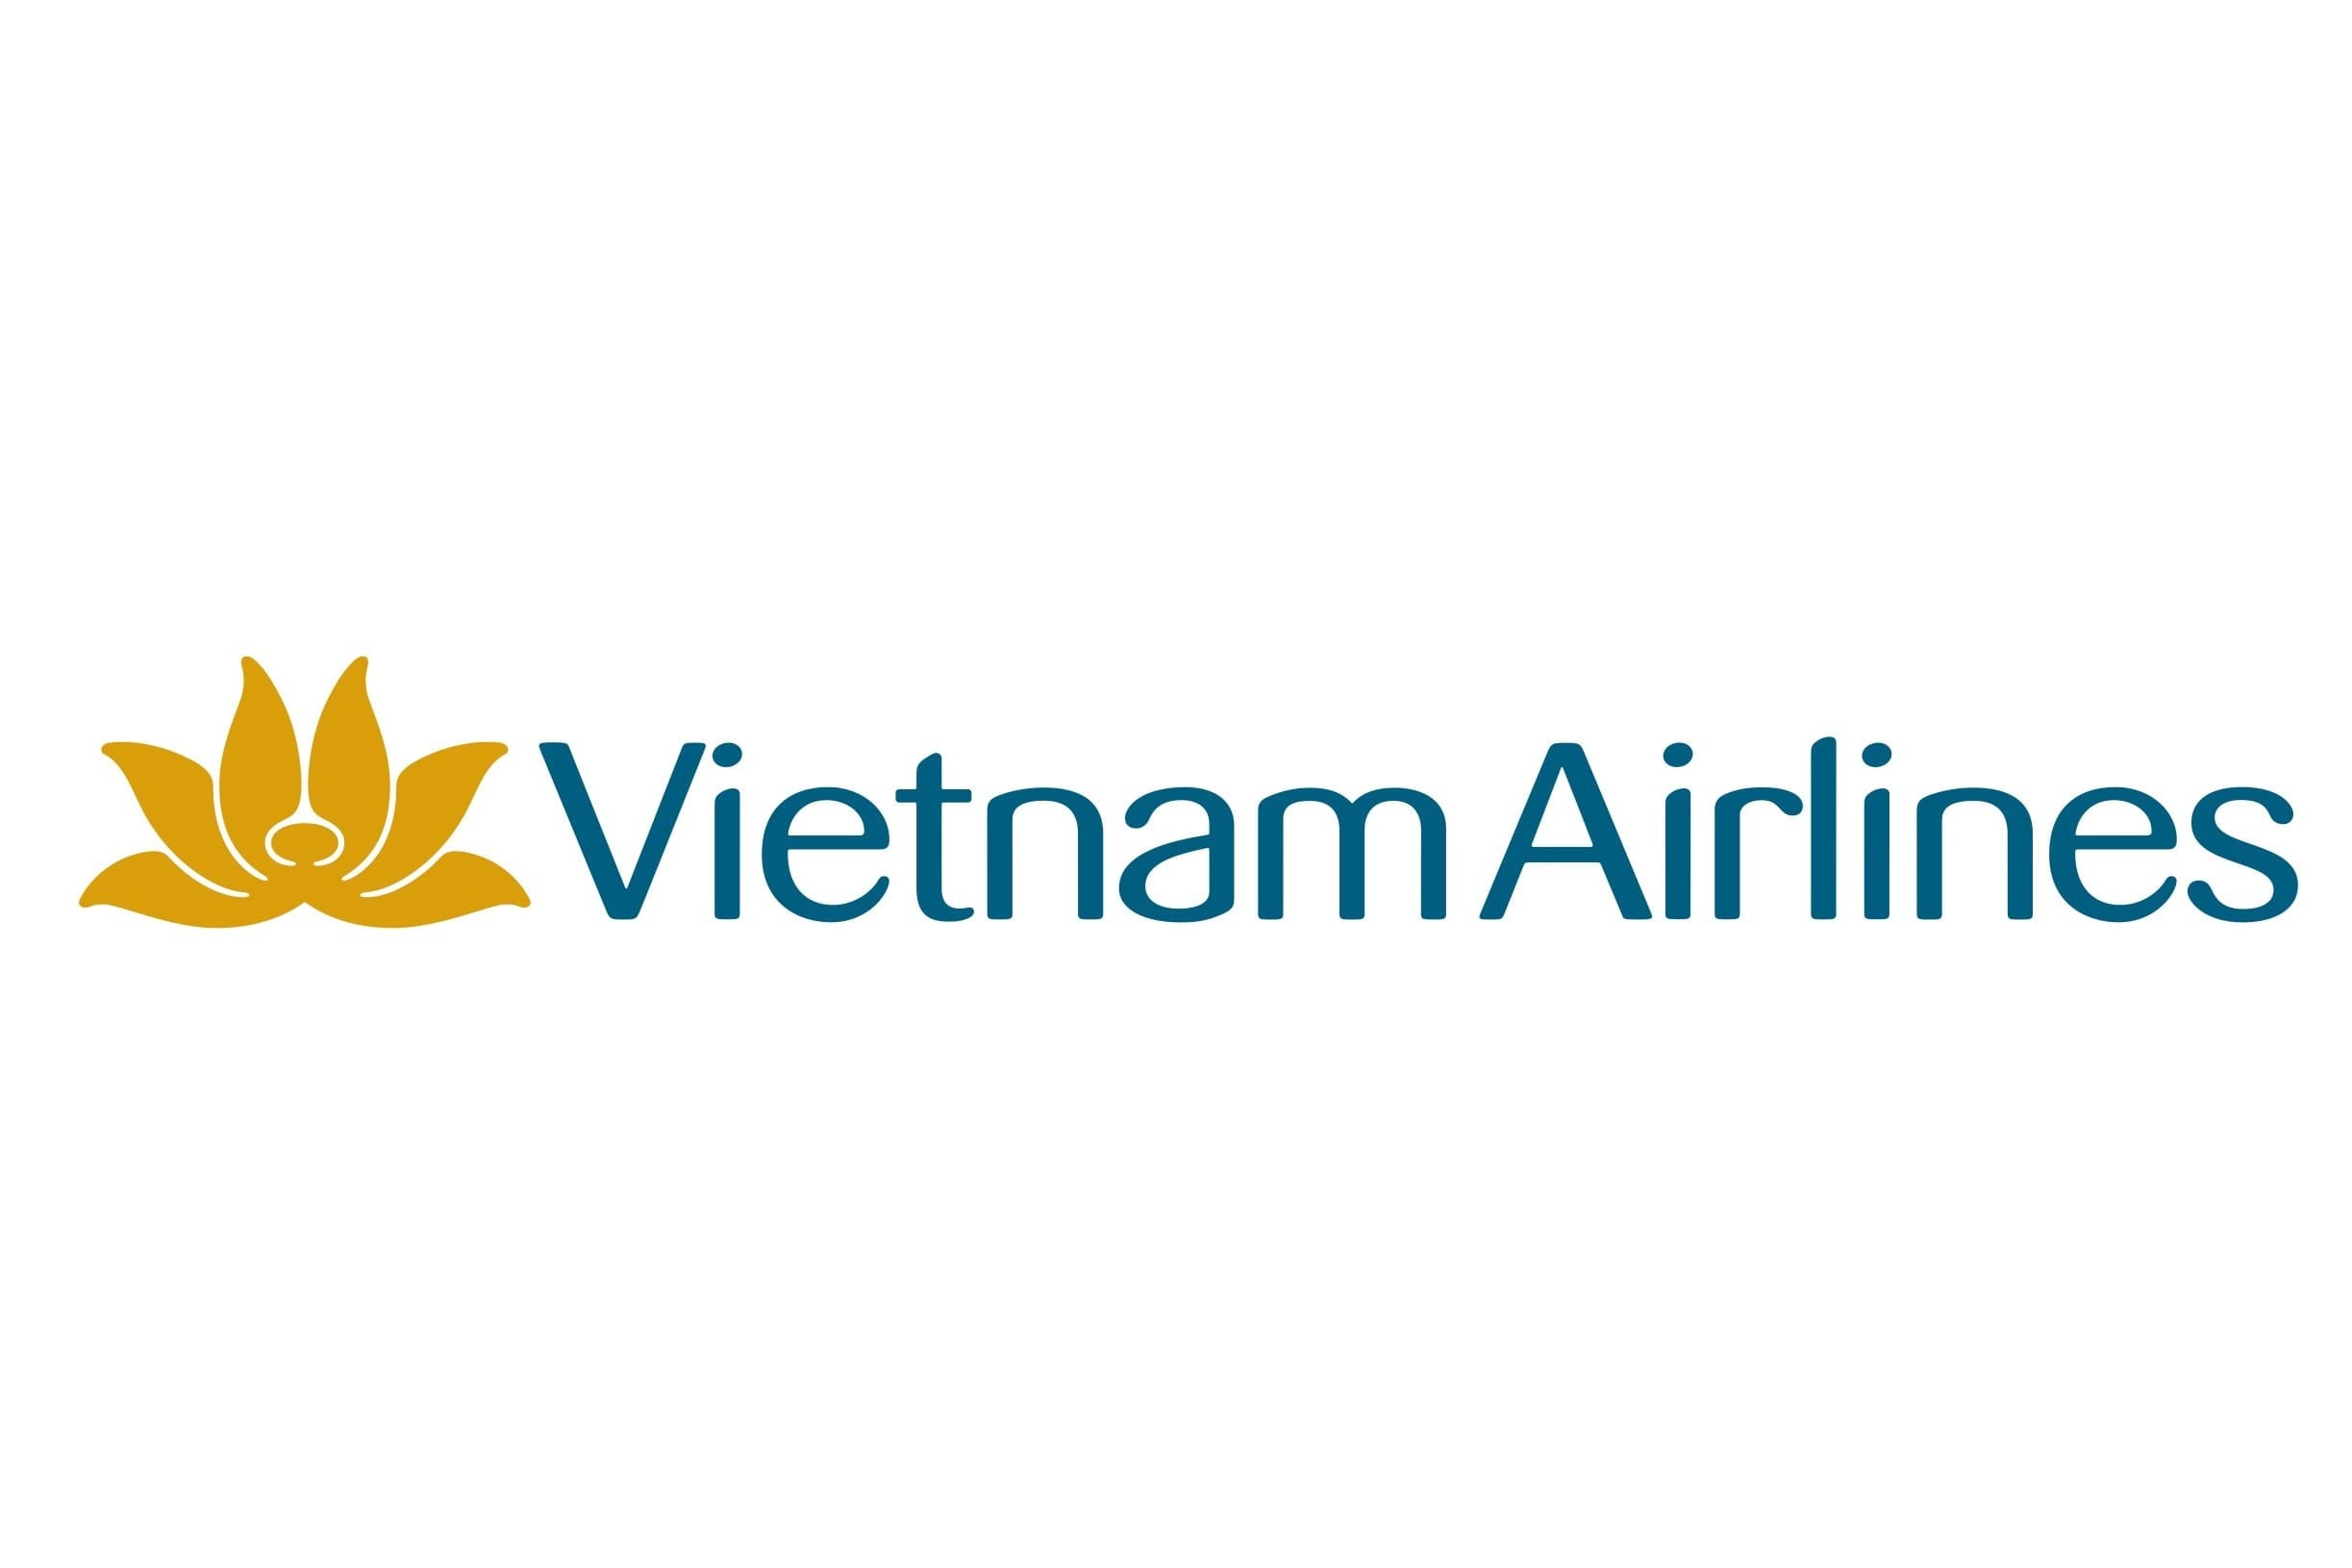 Vietnam Airlines, Symbolic logo, Historical meaning, PNG format, 2450x1640 HD Desktop